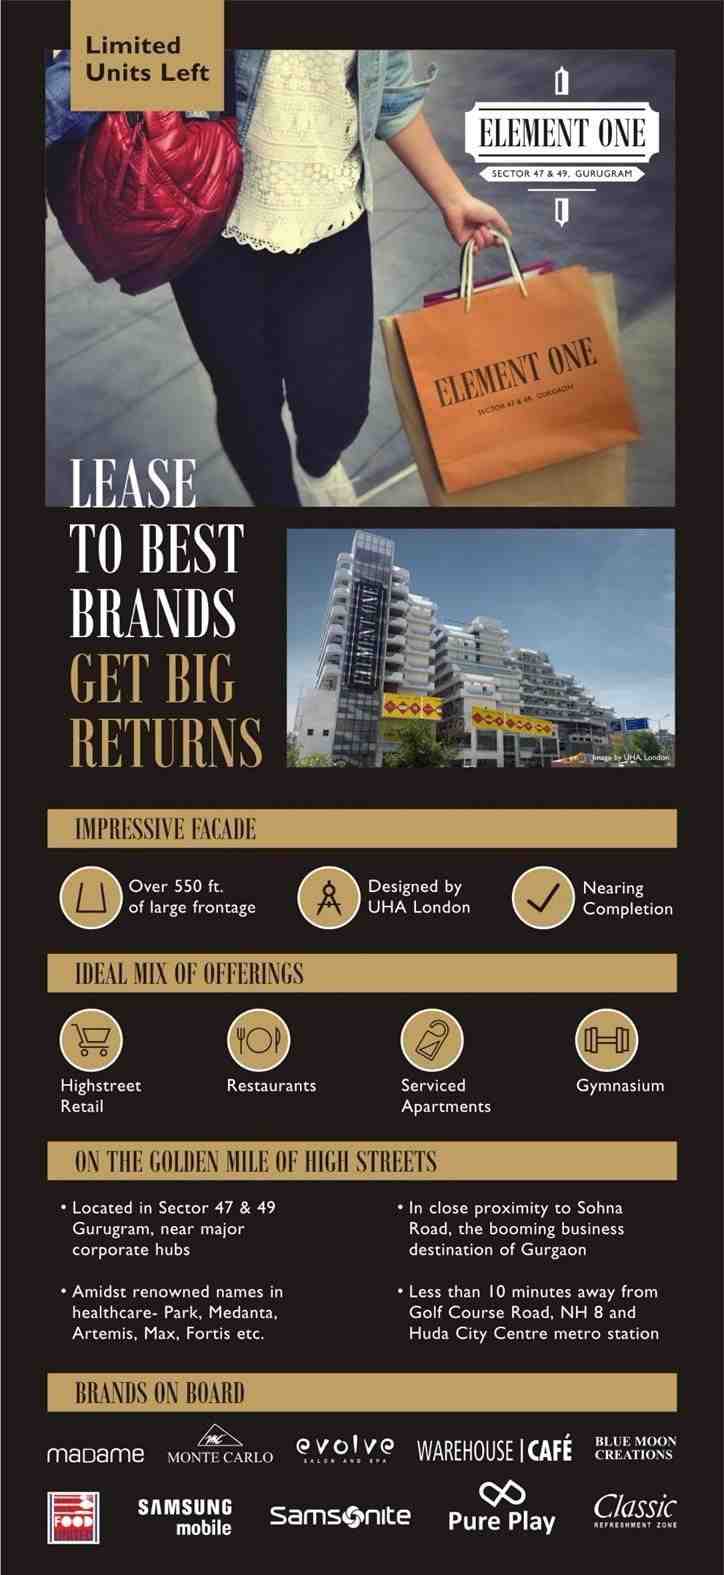 Retail destination for the best brands in Element One, Gurgaon